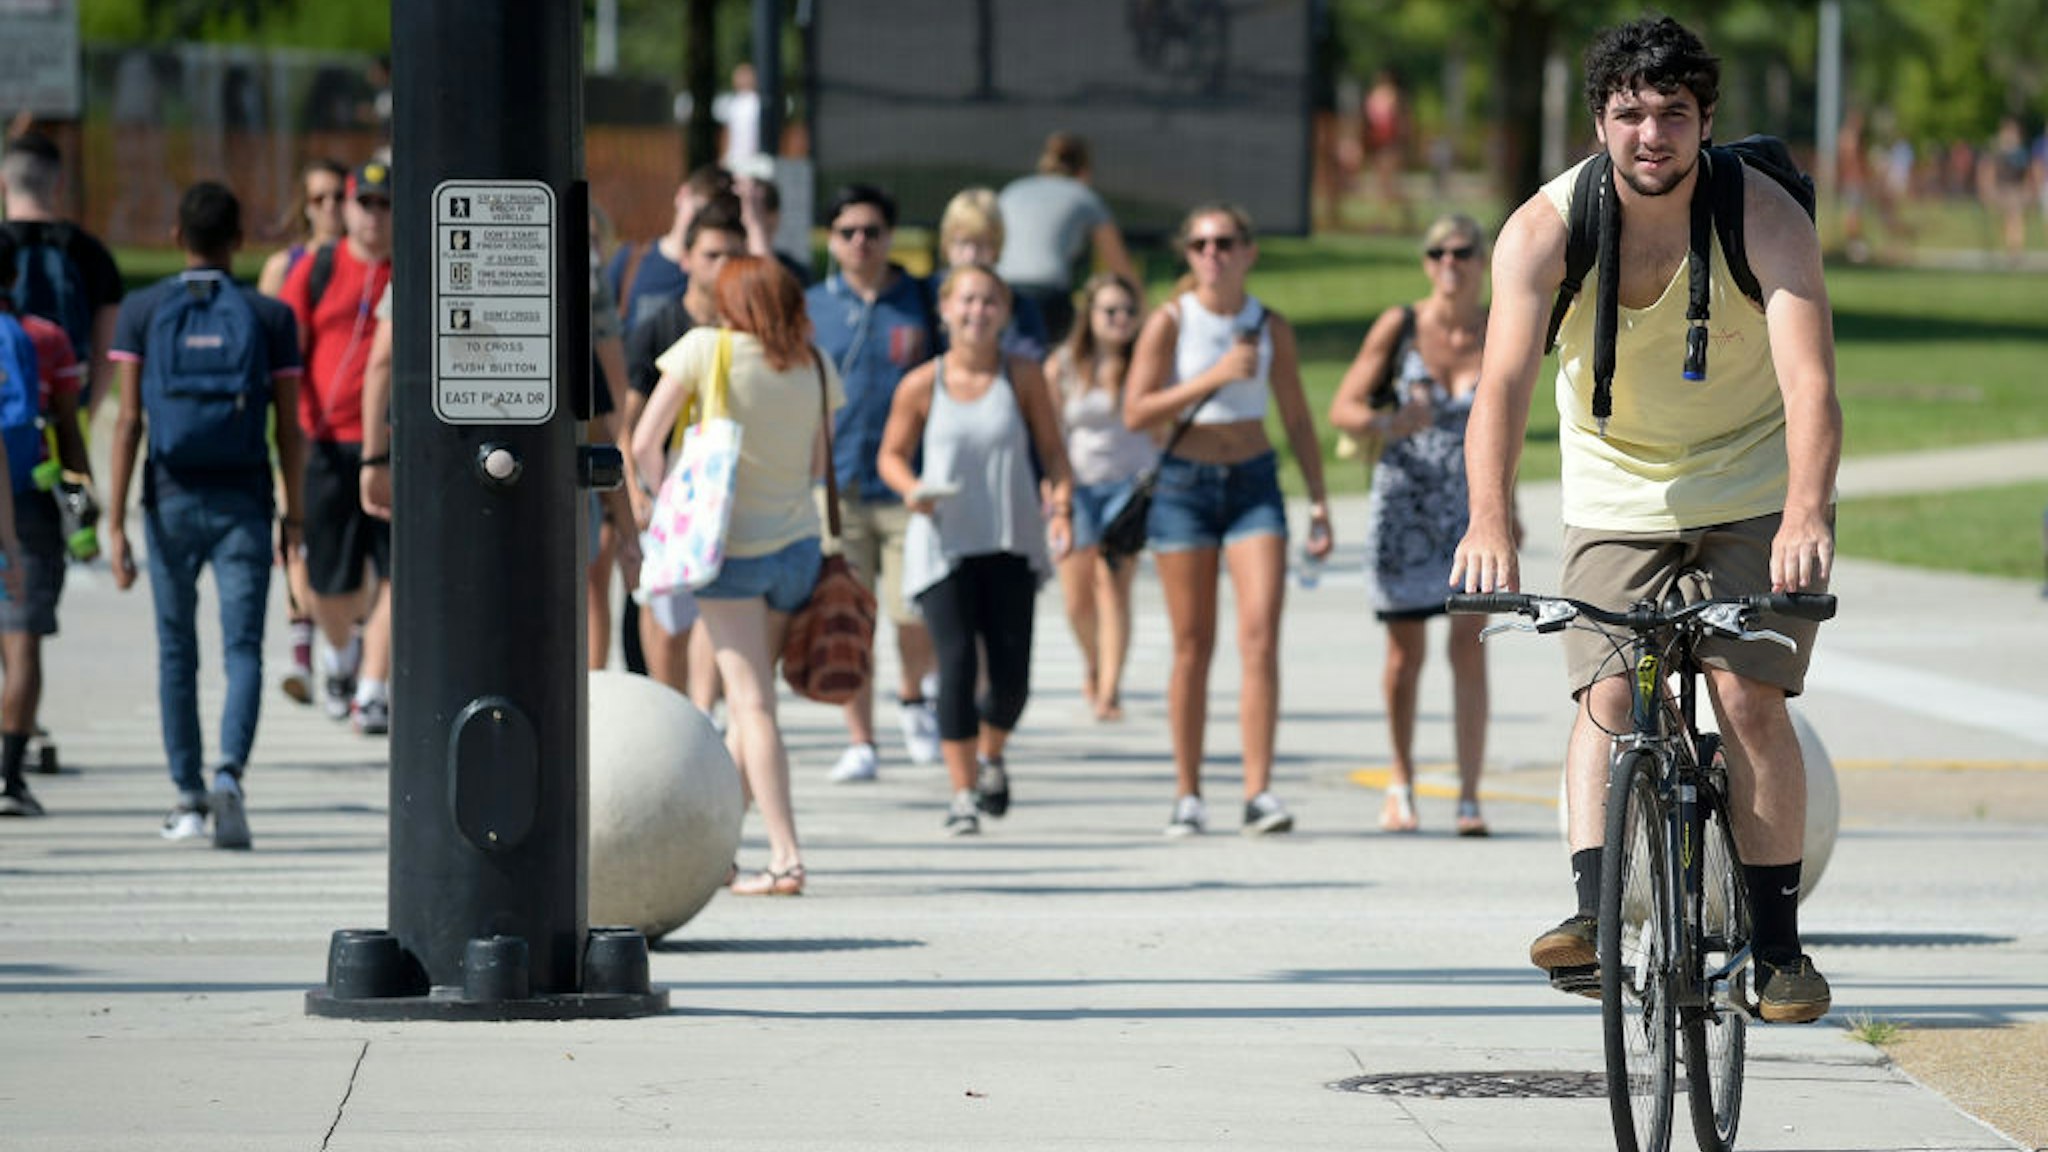 Students make their way across campus on the first day of classes for the fall semester at the University of Central Florida in Orlando, Fla., Monday, Aug. 24, 2015.